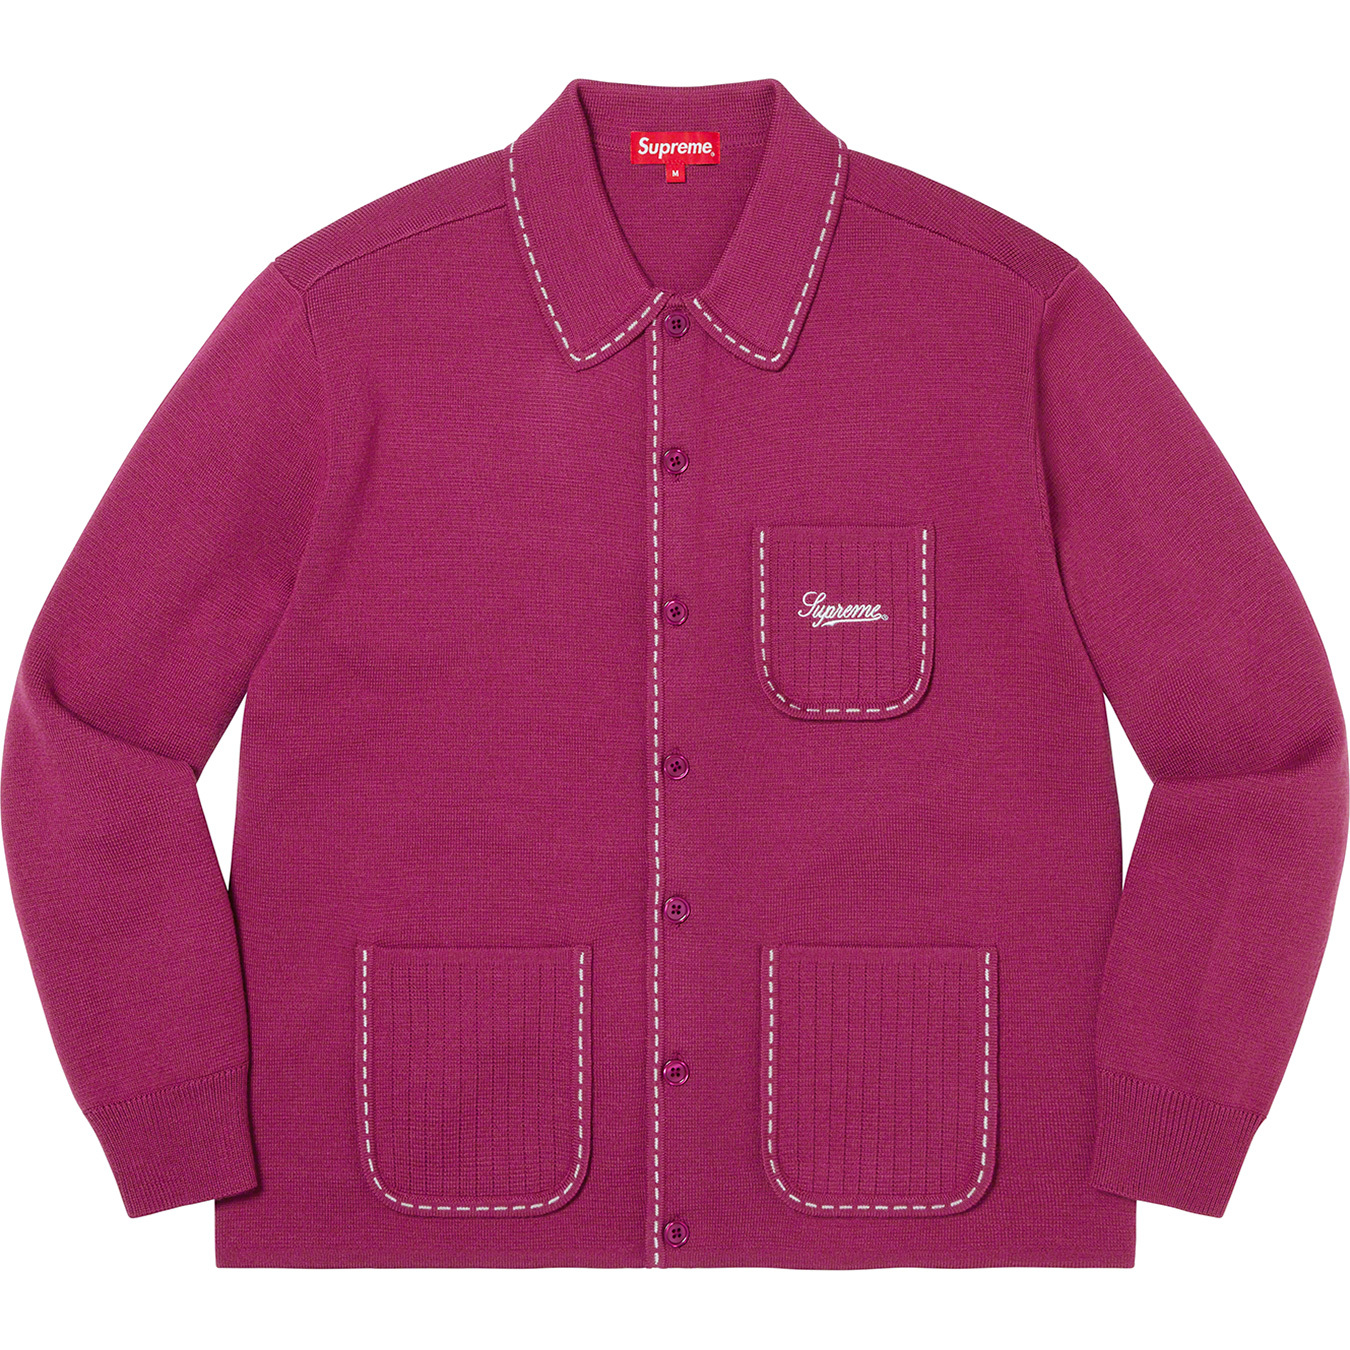 Contrast Stitch Button Up Sweater | Supreme 22fw